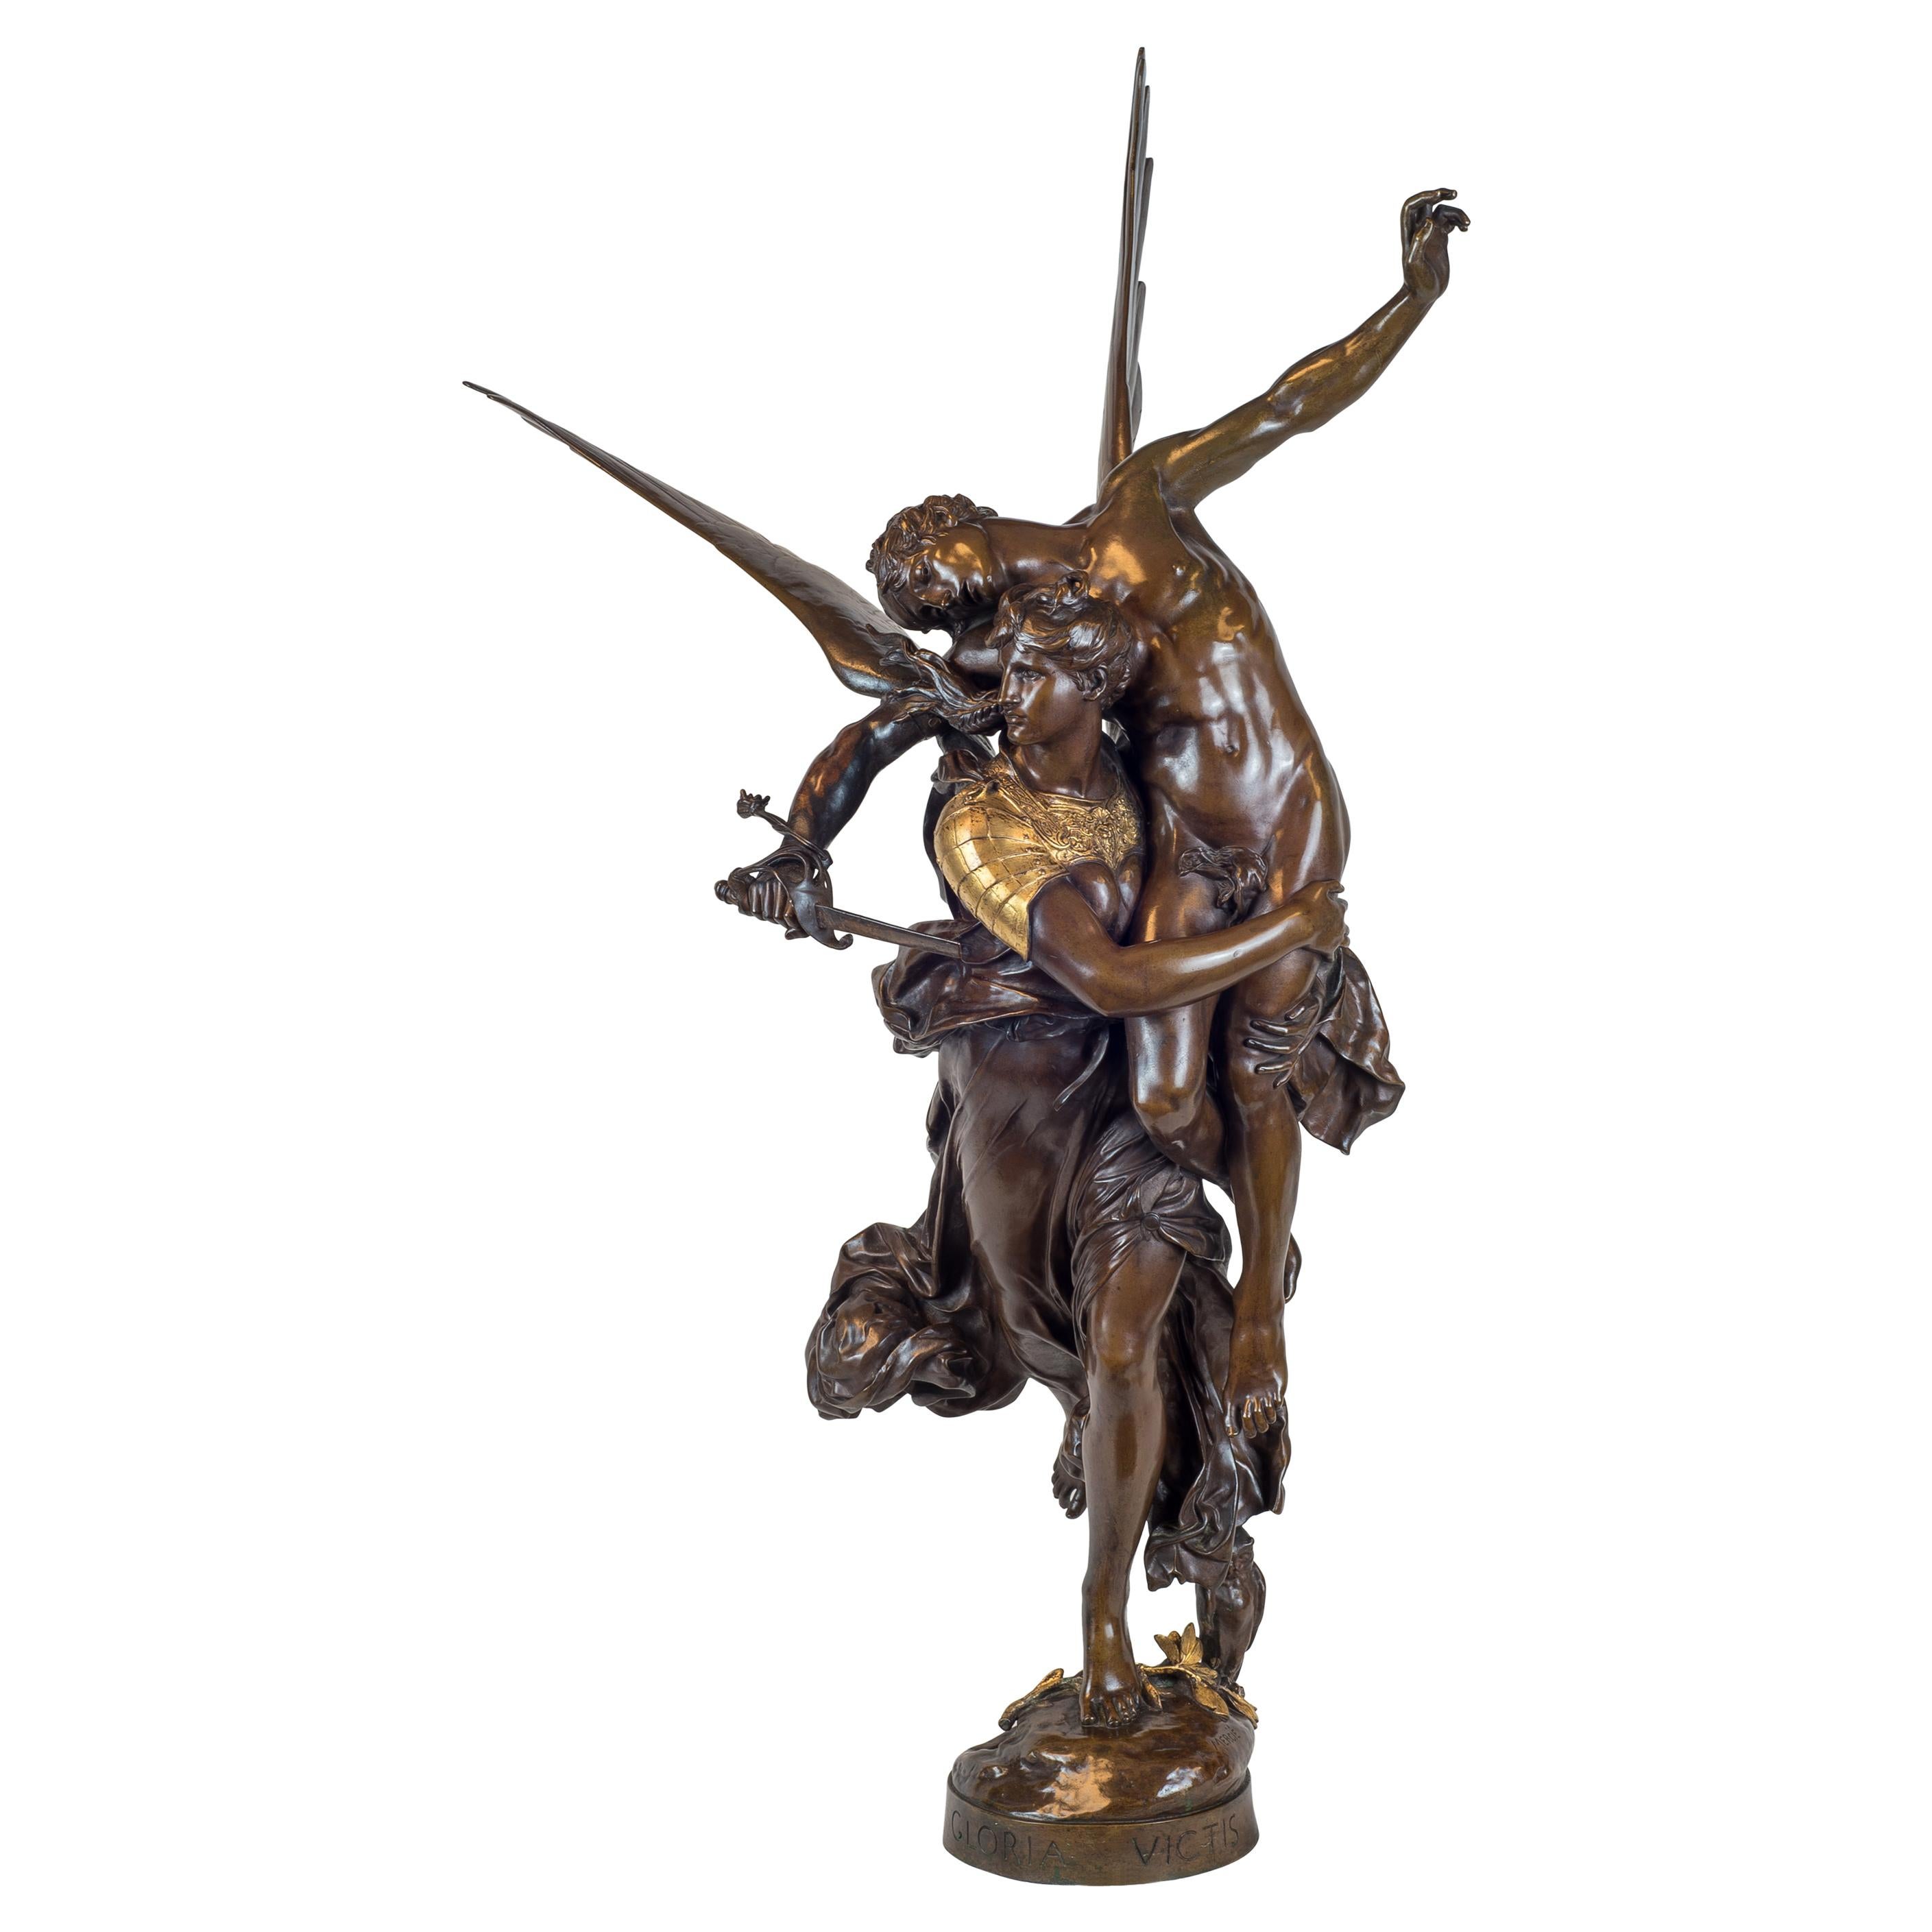 Exceptional 19th Century French Bronze Group of Gloria Victis by Antonin Mercié